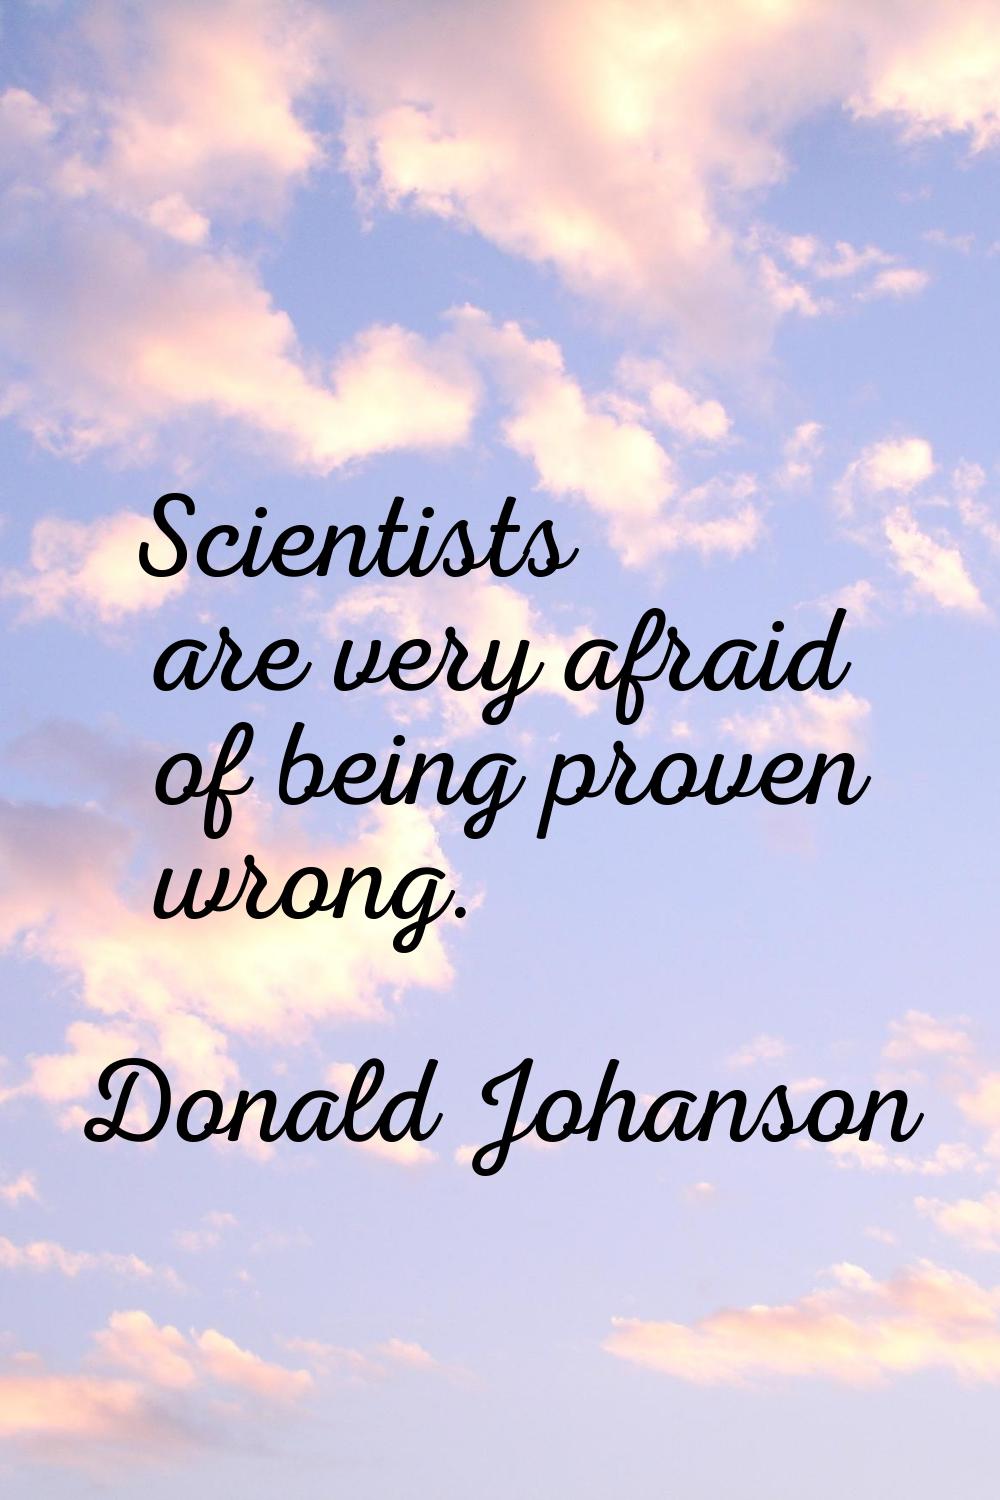 Scientists are very afraid of being proven wrong.